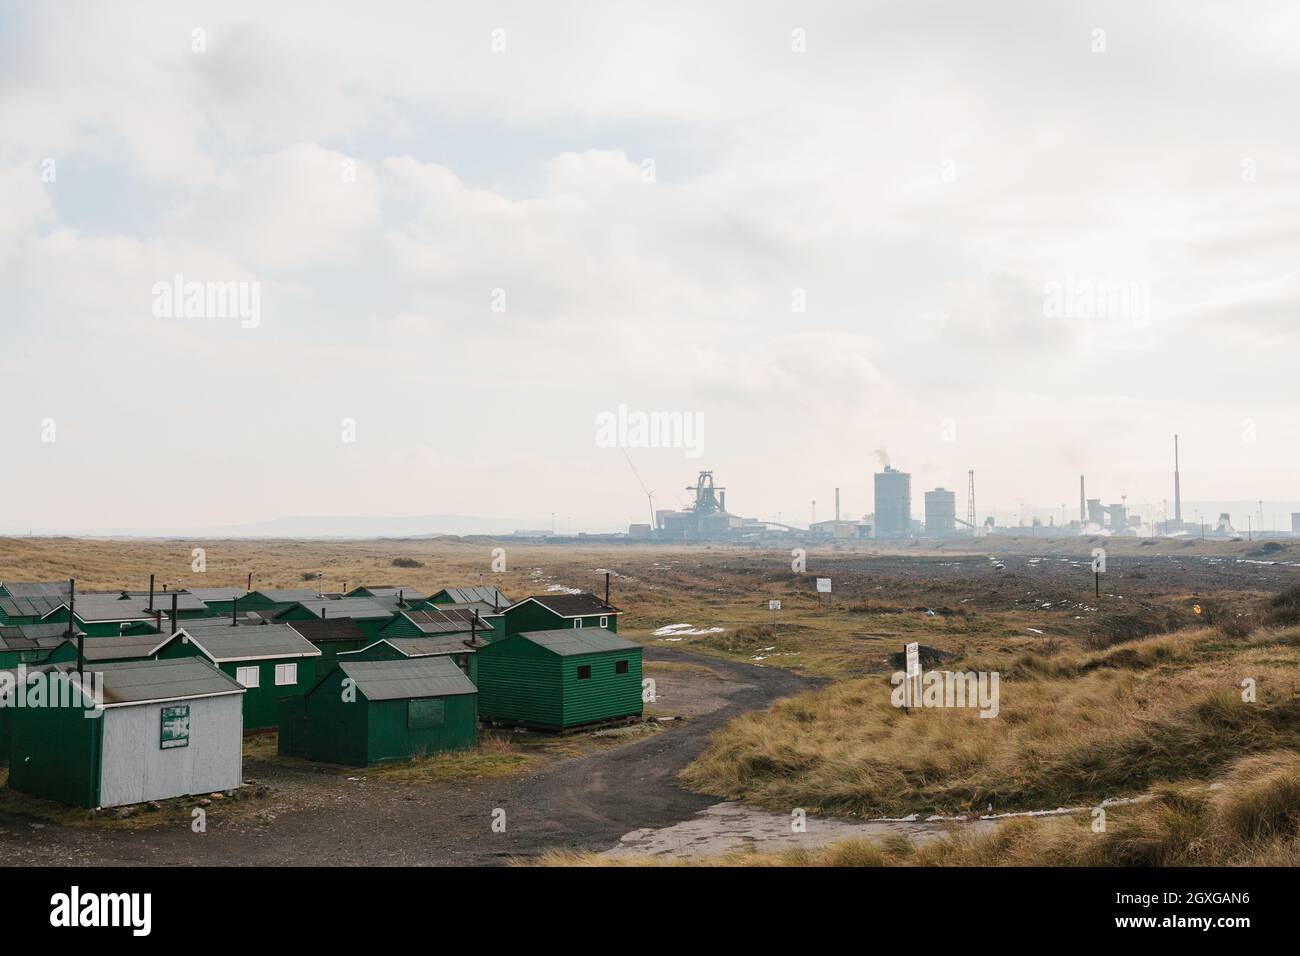 Petrochemical works and Tata Steel works juxtapositioned with the green fishermens huts at Paddys Hole, South Gare. Stock Photo